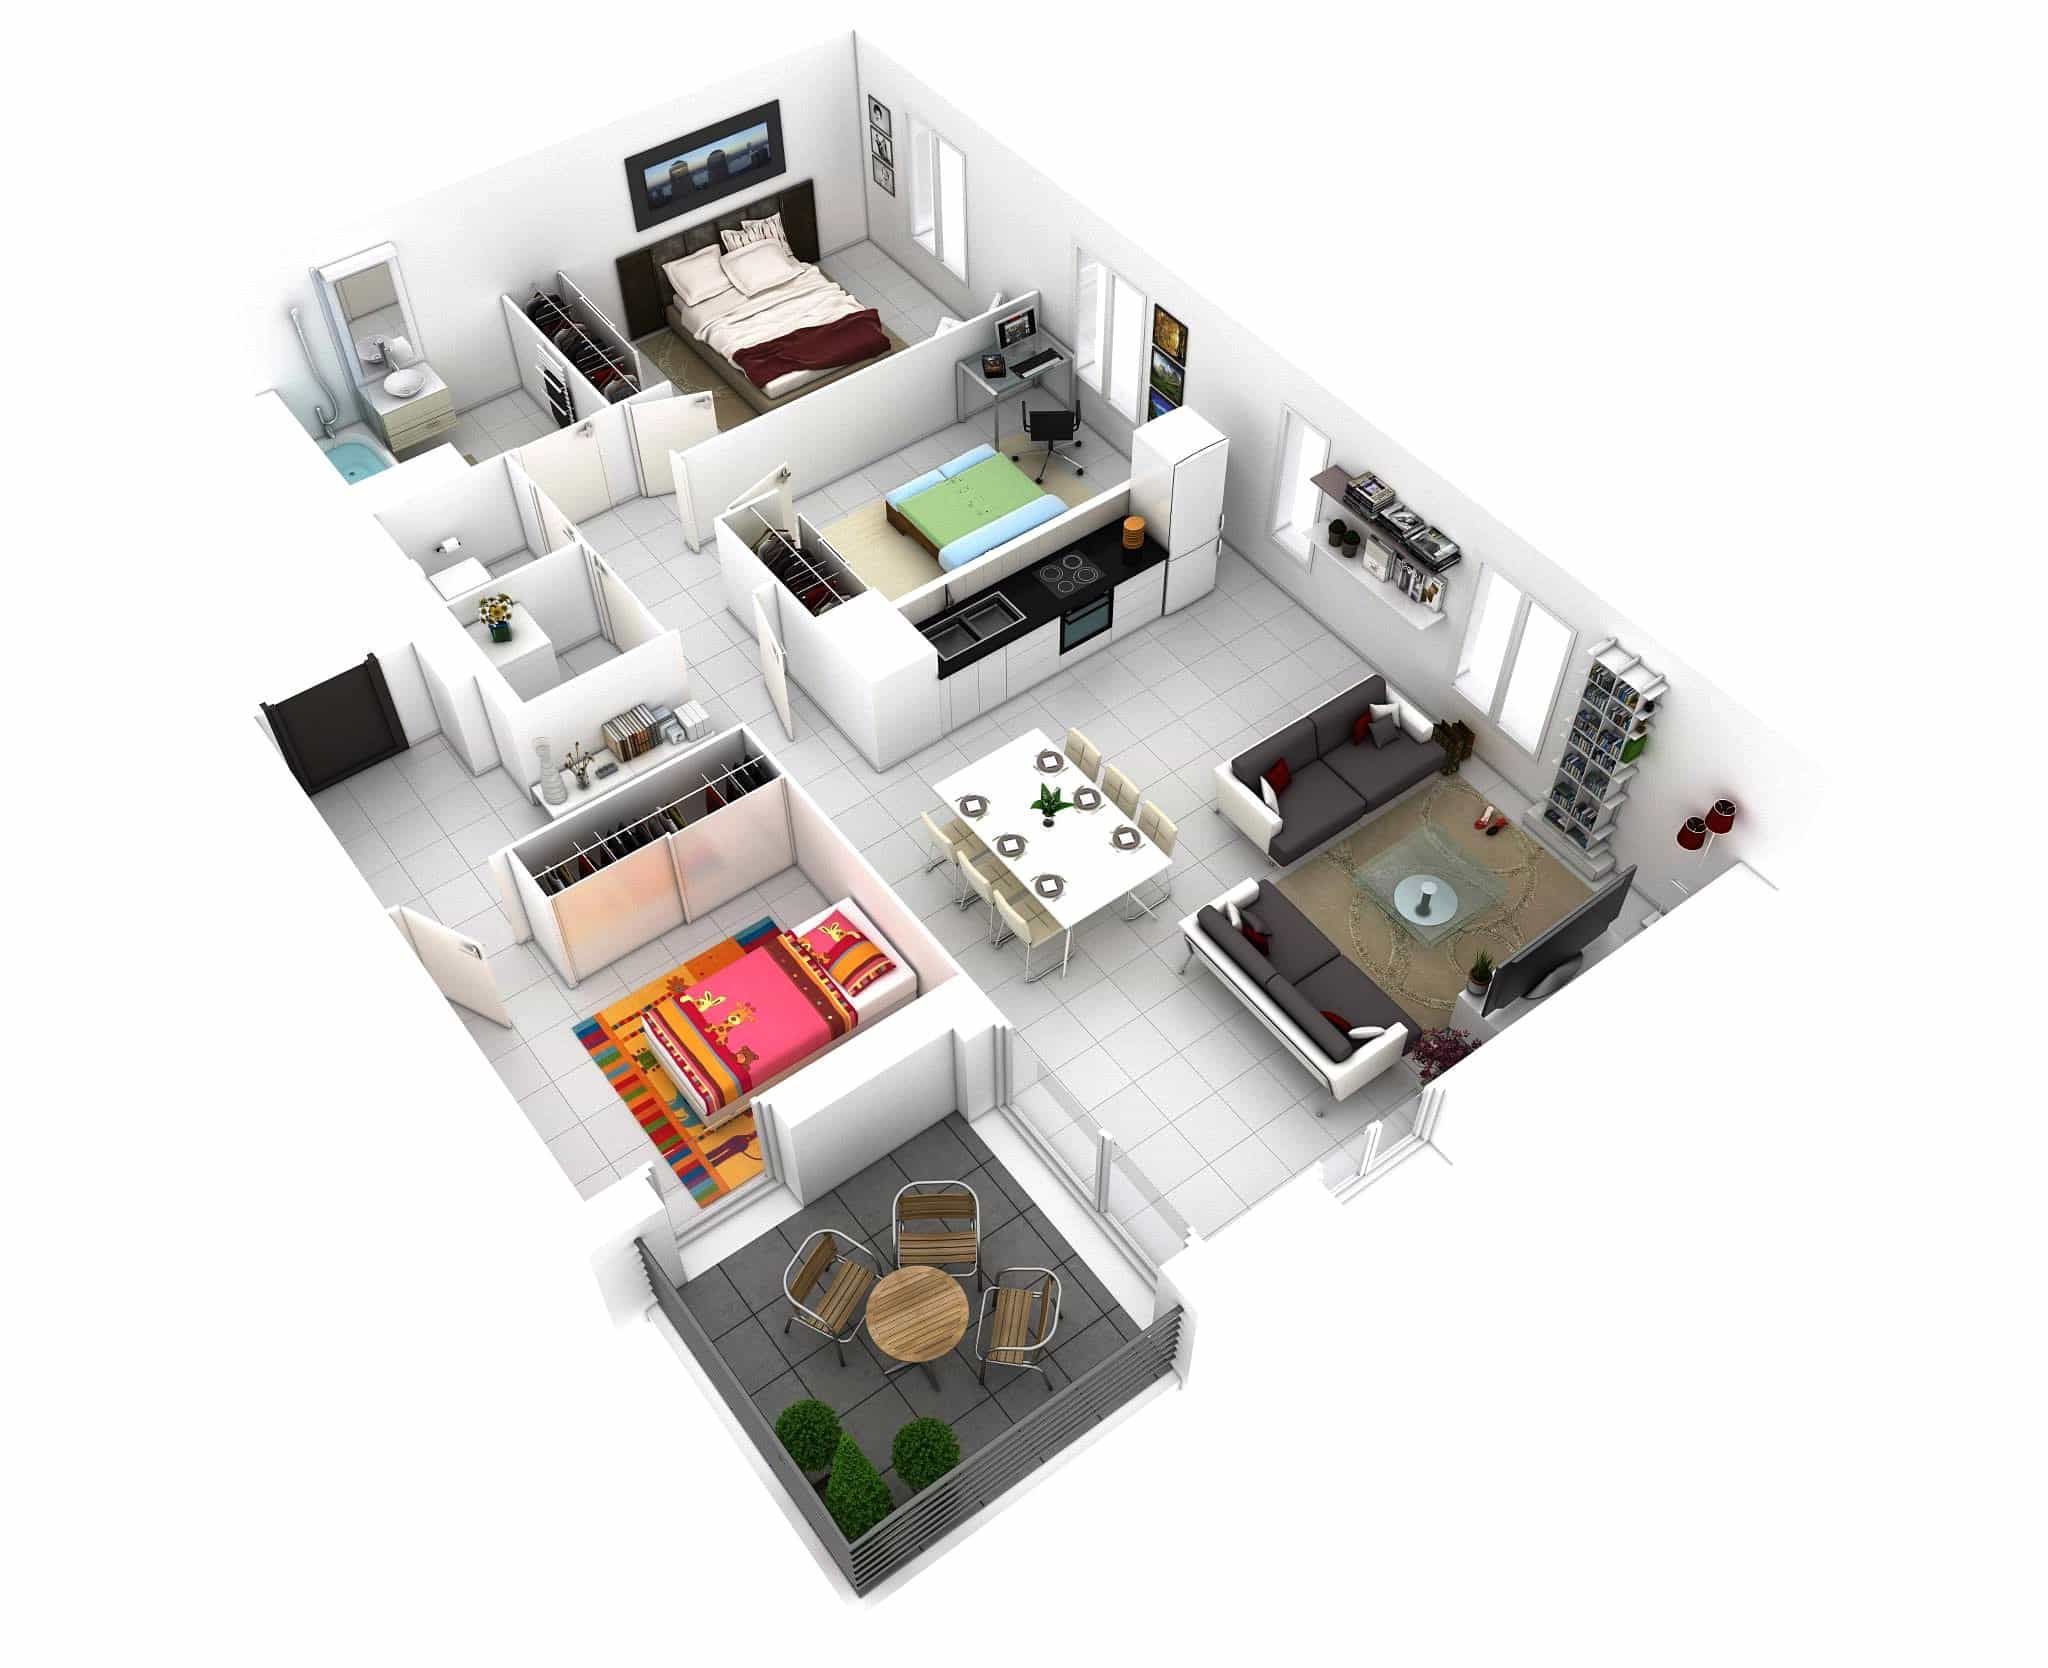 Small House Floor Plans With 3 Bedroom And 1 Bathroom 3d Layout (View 1 of 11)